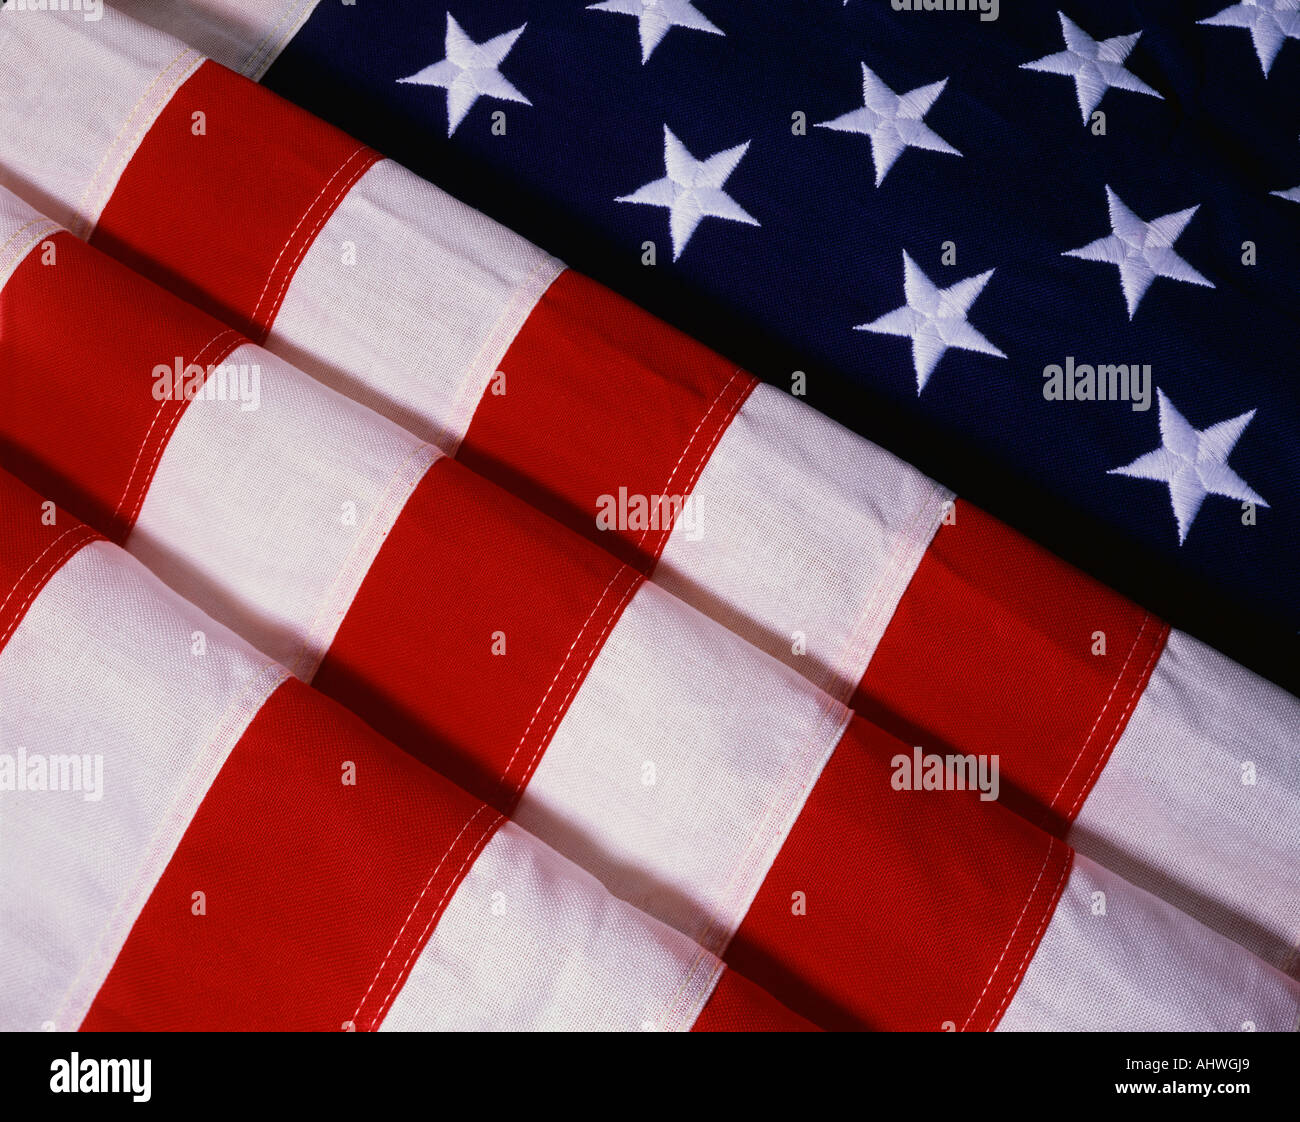 This is a rectangularly shaped folded American flag The field of stars is folded in the shape of an uneven triangle while the Stock Photo